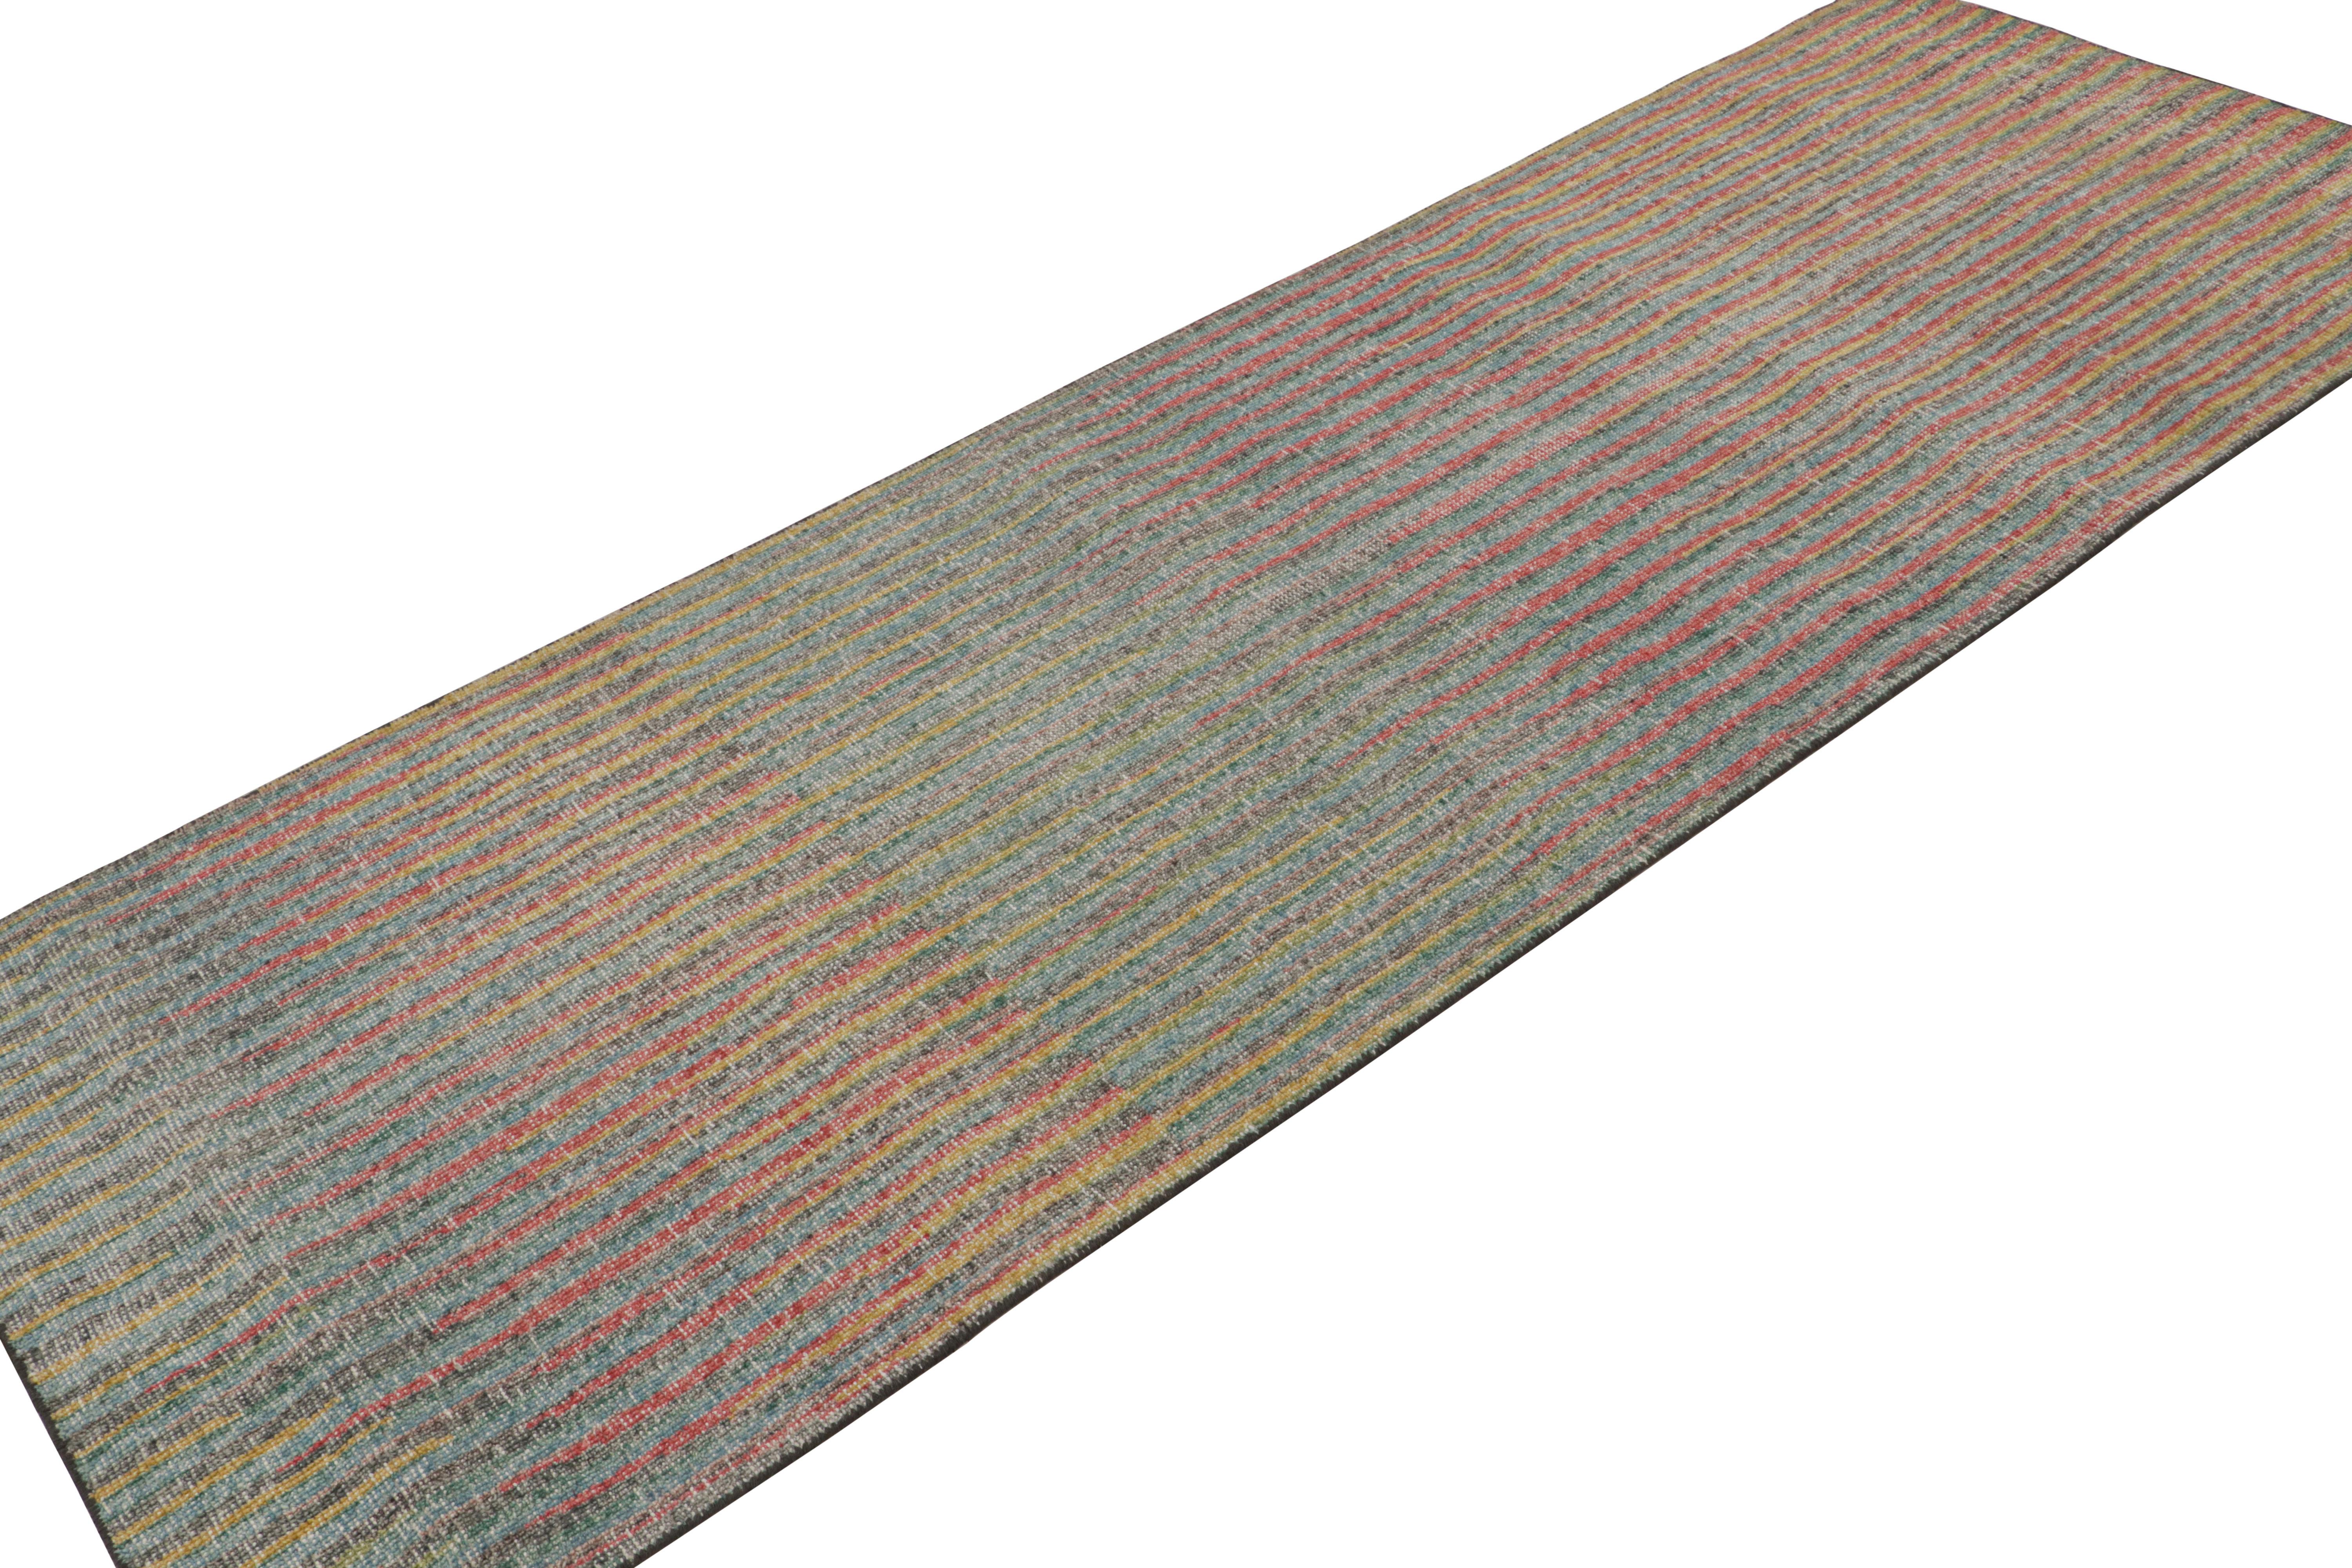 Handknotted in wool, this 3x8 runner from Rug & Kilim’s Homage collection recaptures a distressed, textural look and shabby-chic beauty with its unique construction.

On the Design
This modern abstract rug enjoys vibrant polychromatic colors